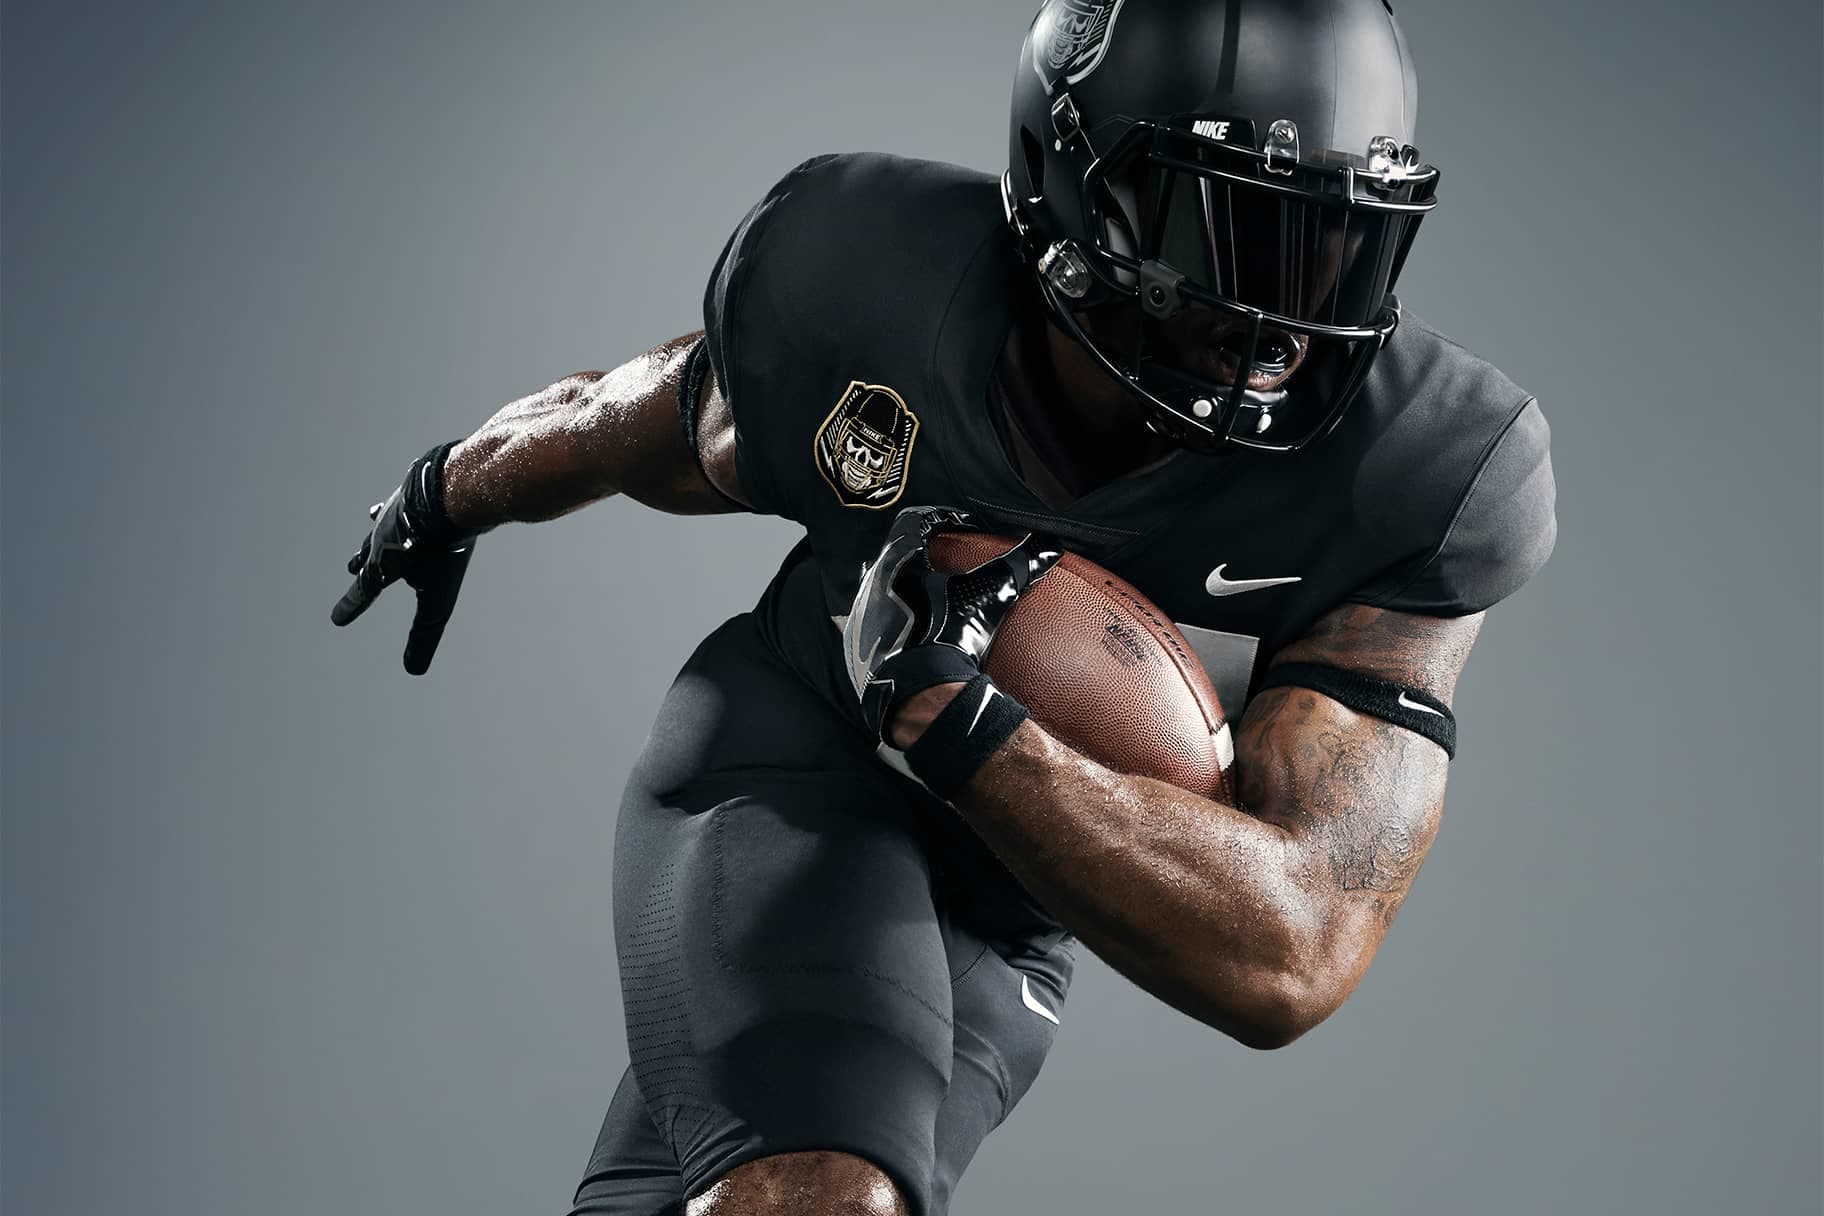 7 Pieces of Protective American Football Gear From Nike to Buy Now. Nike IE